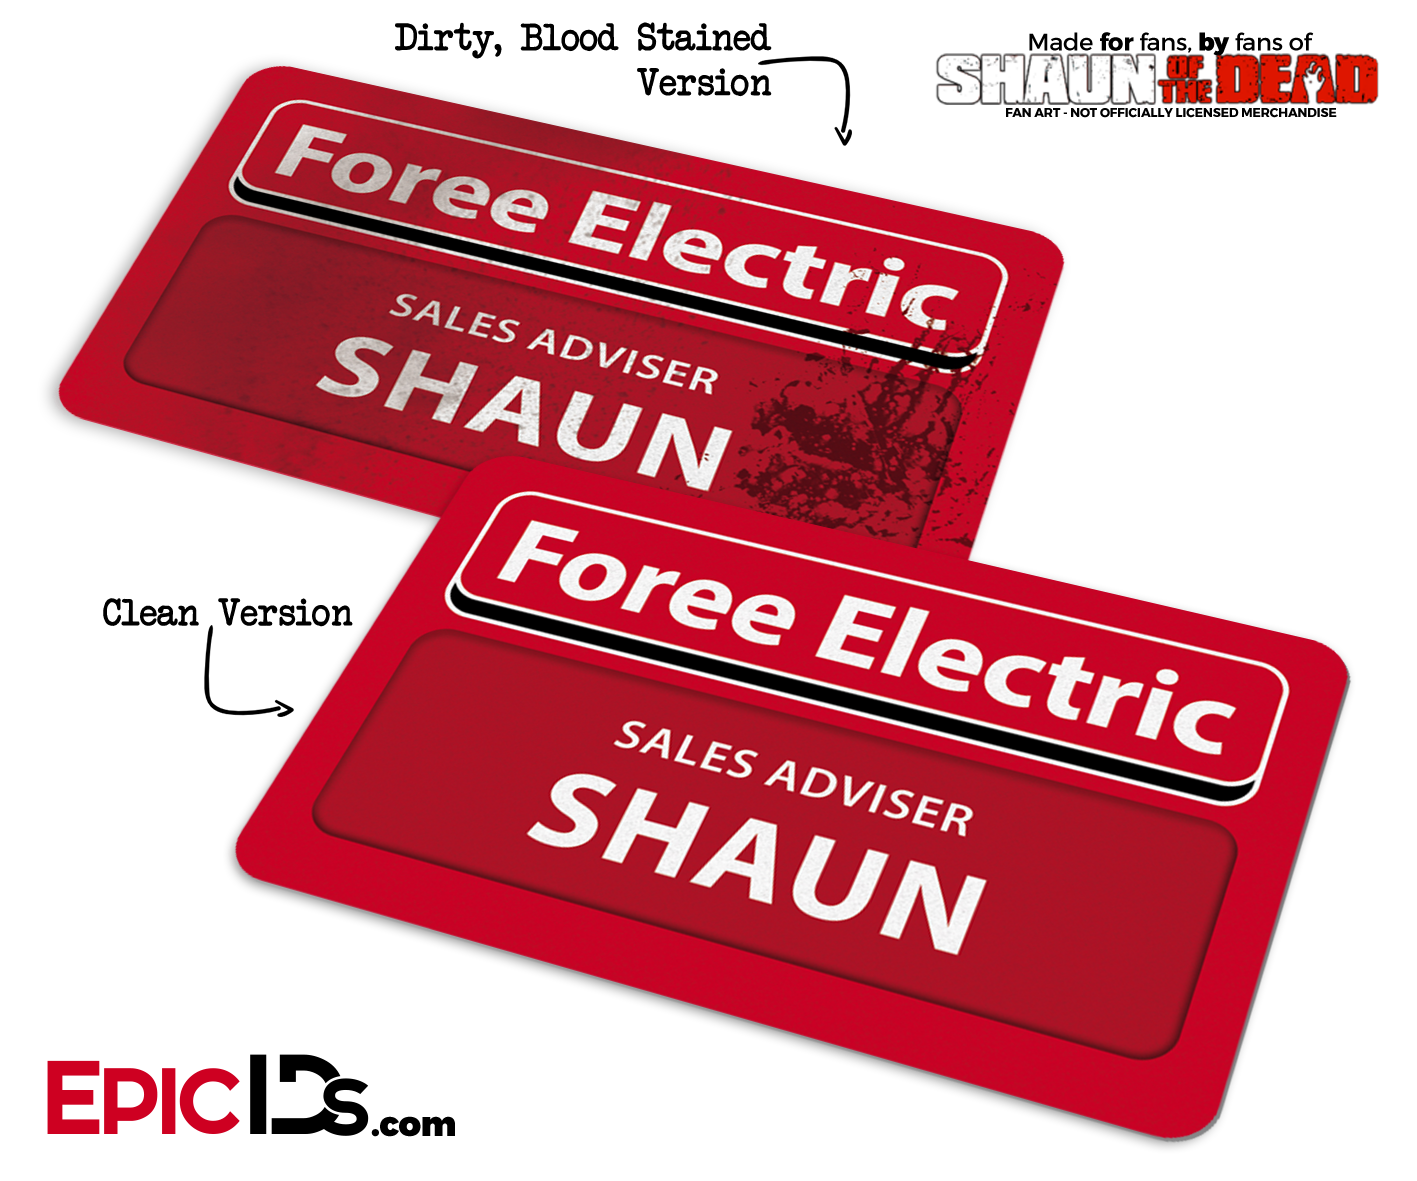 Foree Electric 'Shaun of the Dead' Cosplay Replica Name Badge